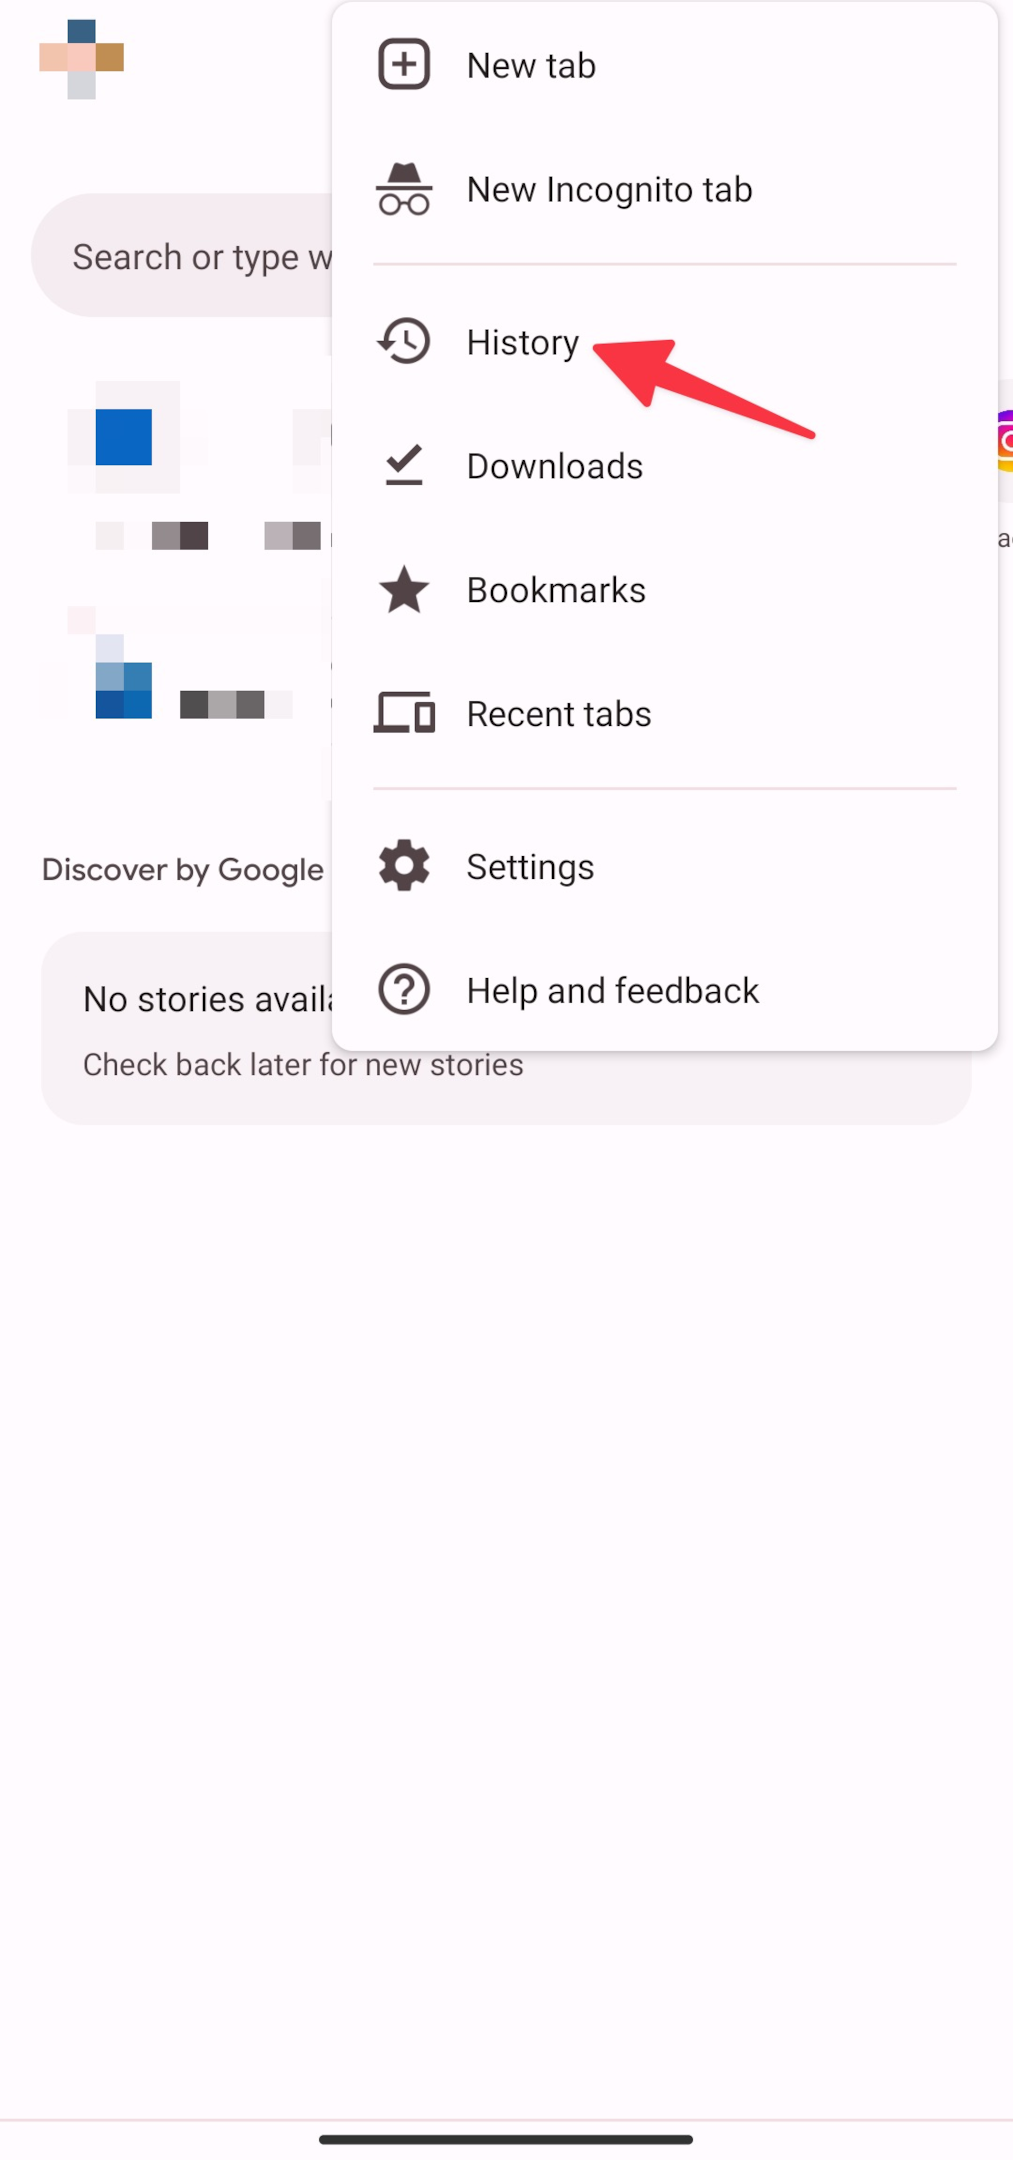 Remote.tools shows how to clear Google search history on an Android device. Tap on History in the pop up menu to clear Google browsing history